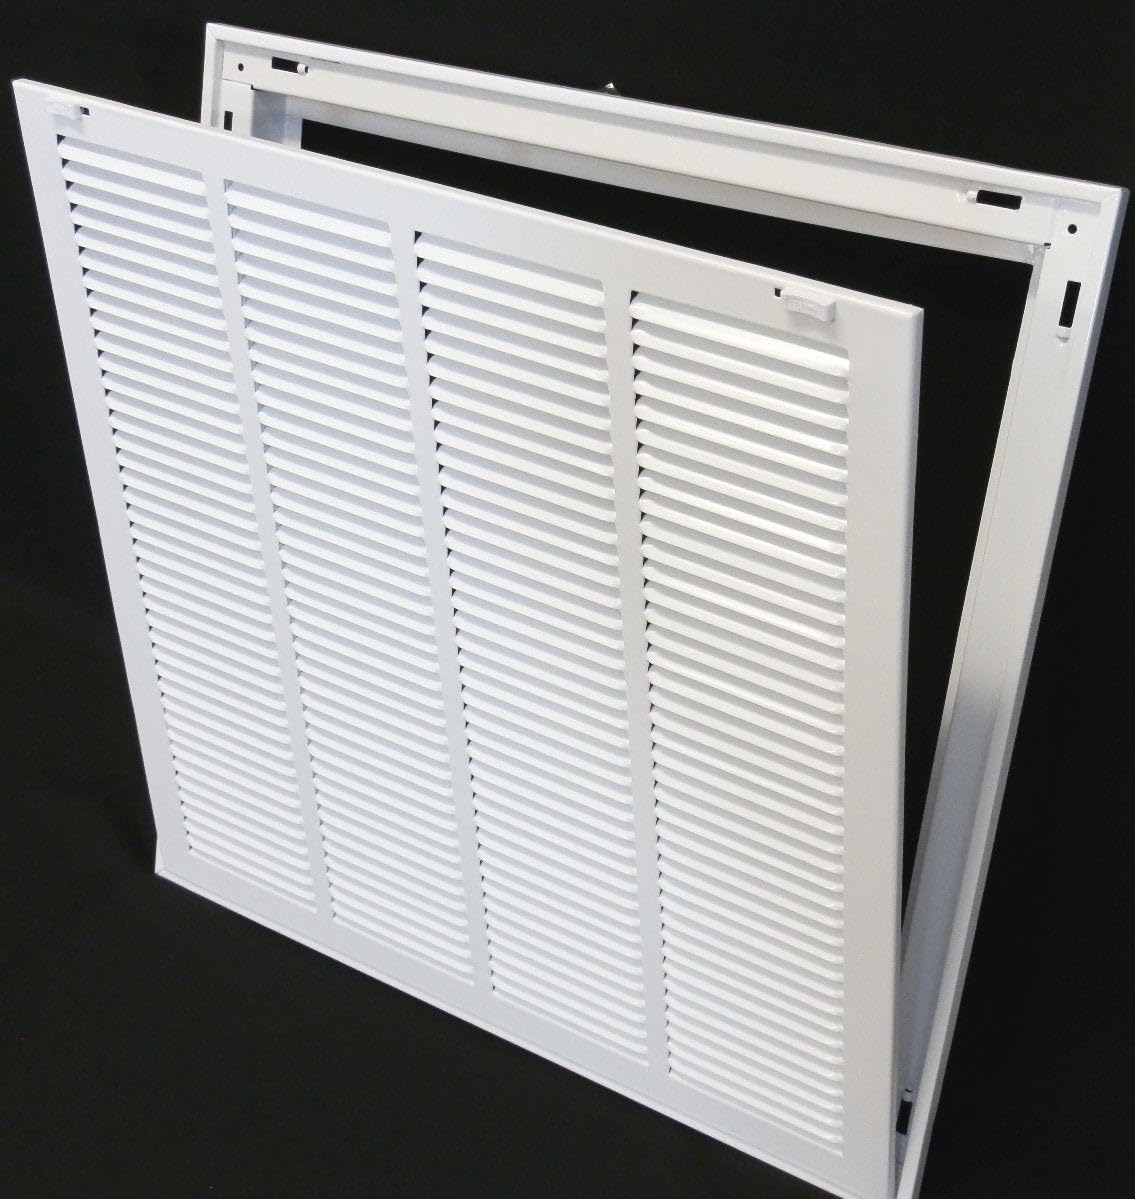 30&quot; X 18&quot; Steel Return Air Filter Grille for 1&quot; Filter - Removable Frame - [Outer Dimensions: 32 5/8&quot; X 20 5/8&quot;]